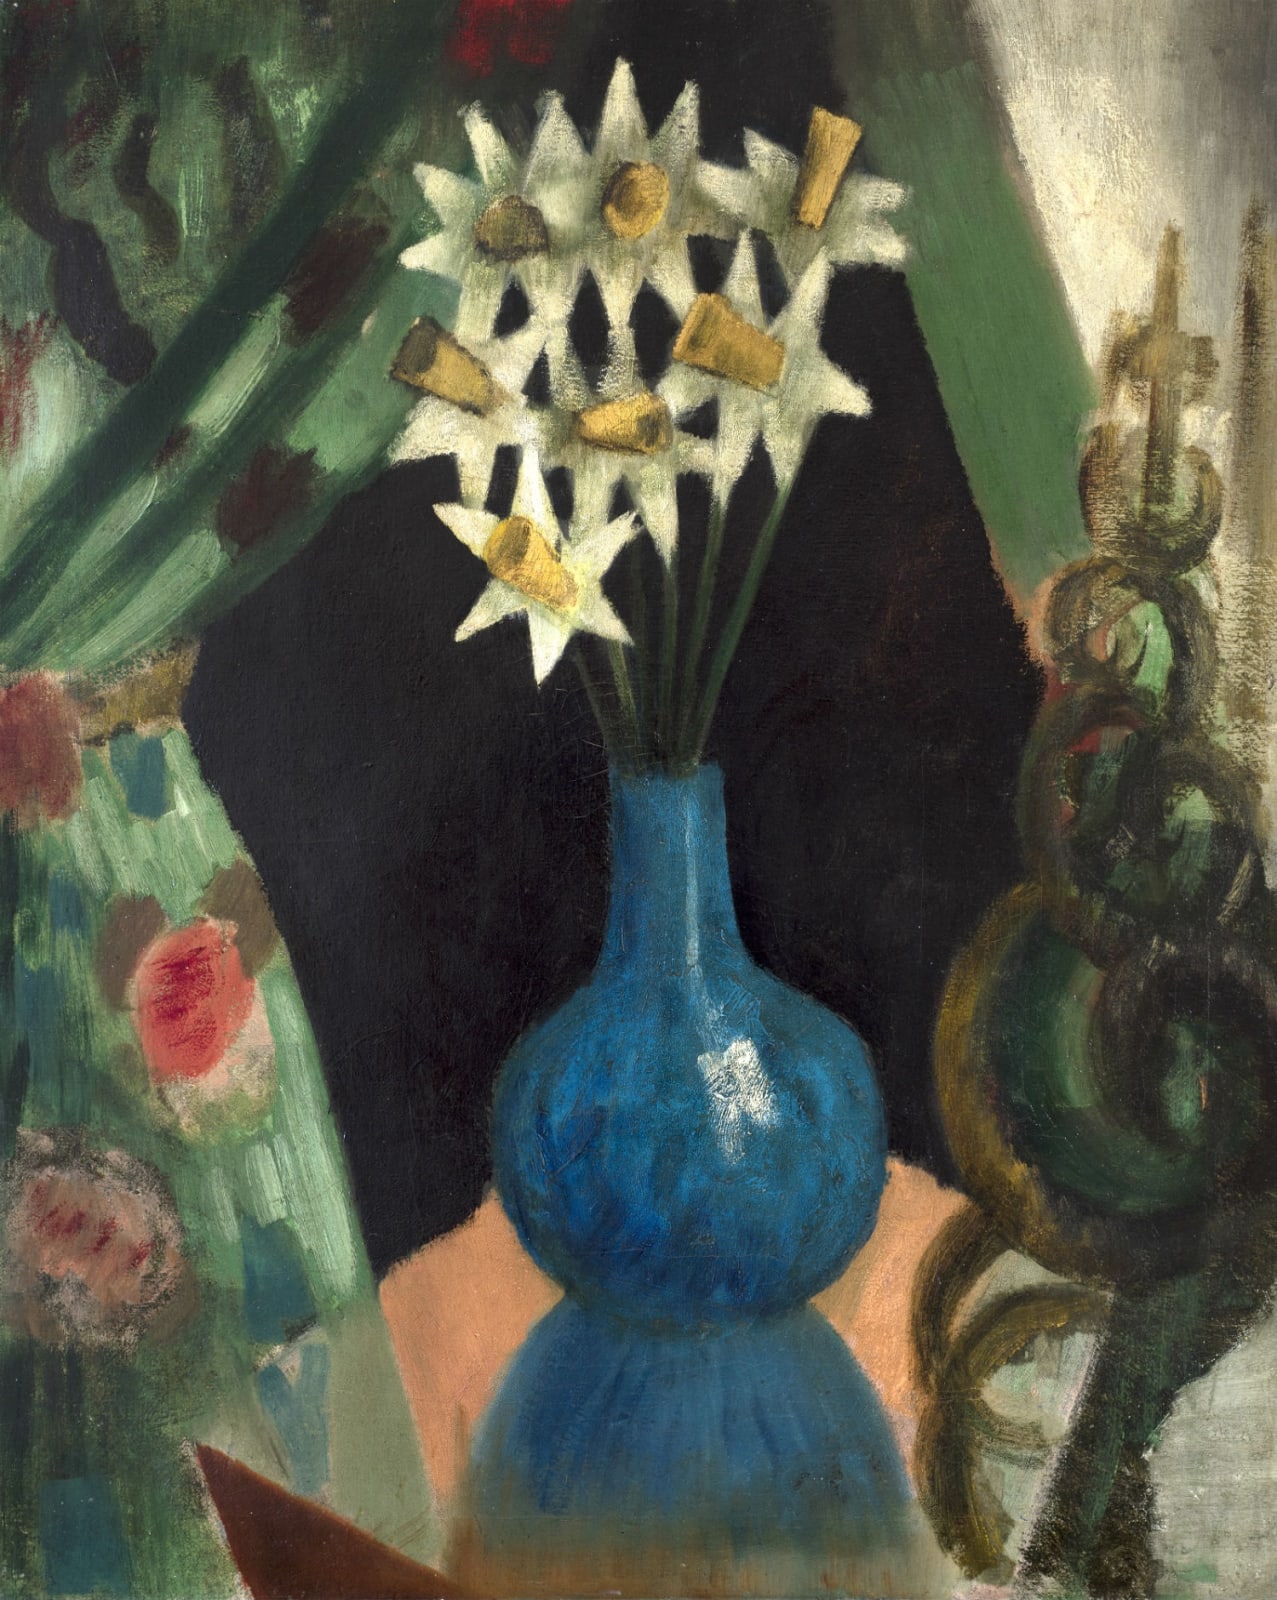 Mark Gertler (1891-1939) Daffodils in a Blue Bottle 1916 Oil on canvas 68.5 x 56 cm Ben Uri Collection Luke Gertler Bequest, on loan with Art Fund support, 2019